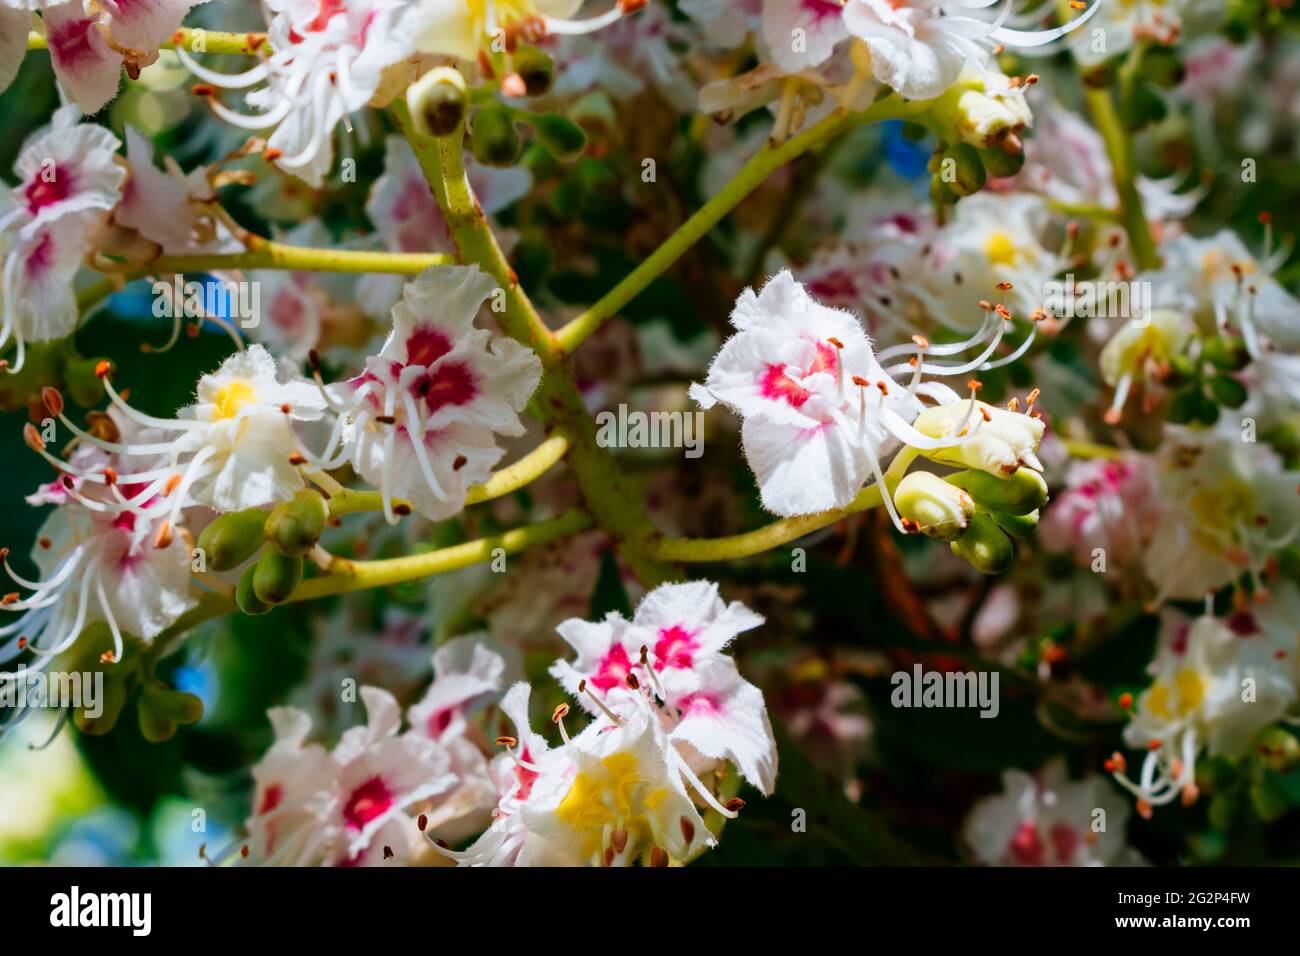 Detail of the inflorescences. Huingan, Schinus polygamus. Schinus polygama, the Hardee peppertree or Chilean pepper tree, is a species of plant in the Stock Photo